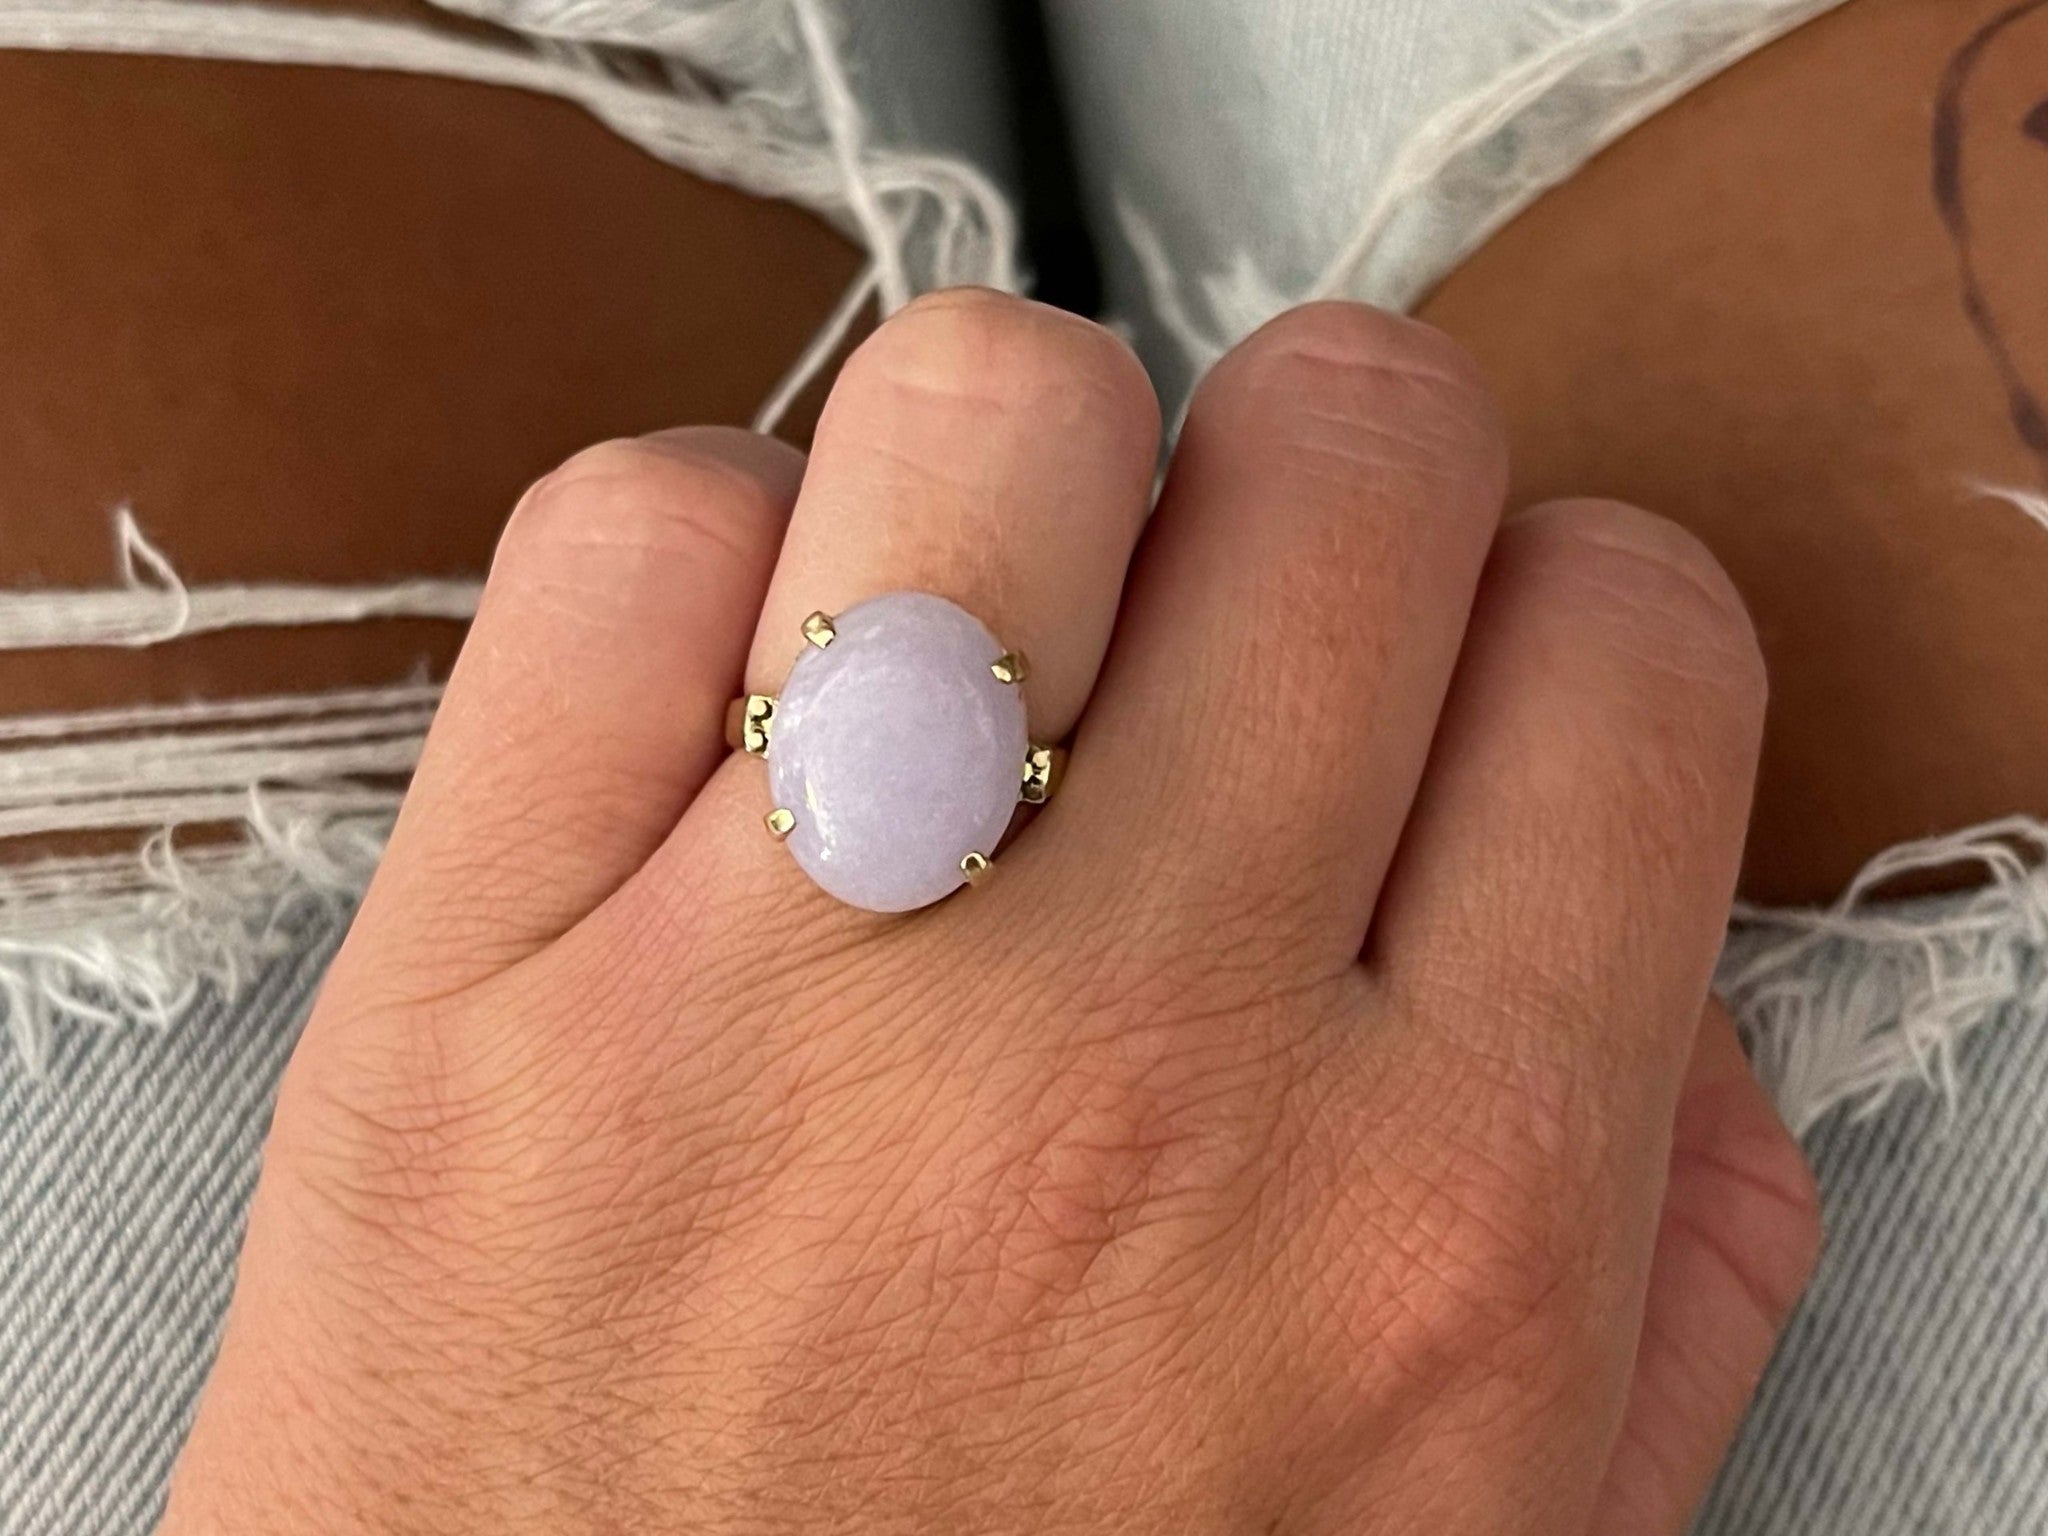 Lavender Oval Jade Cabochon Ring in 14k Yellow Gold